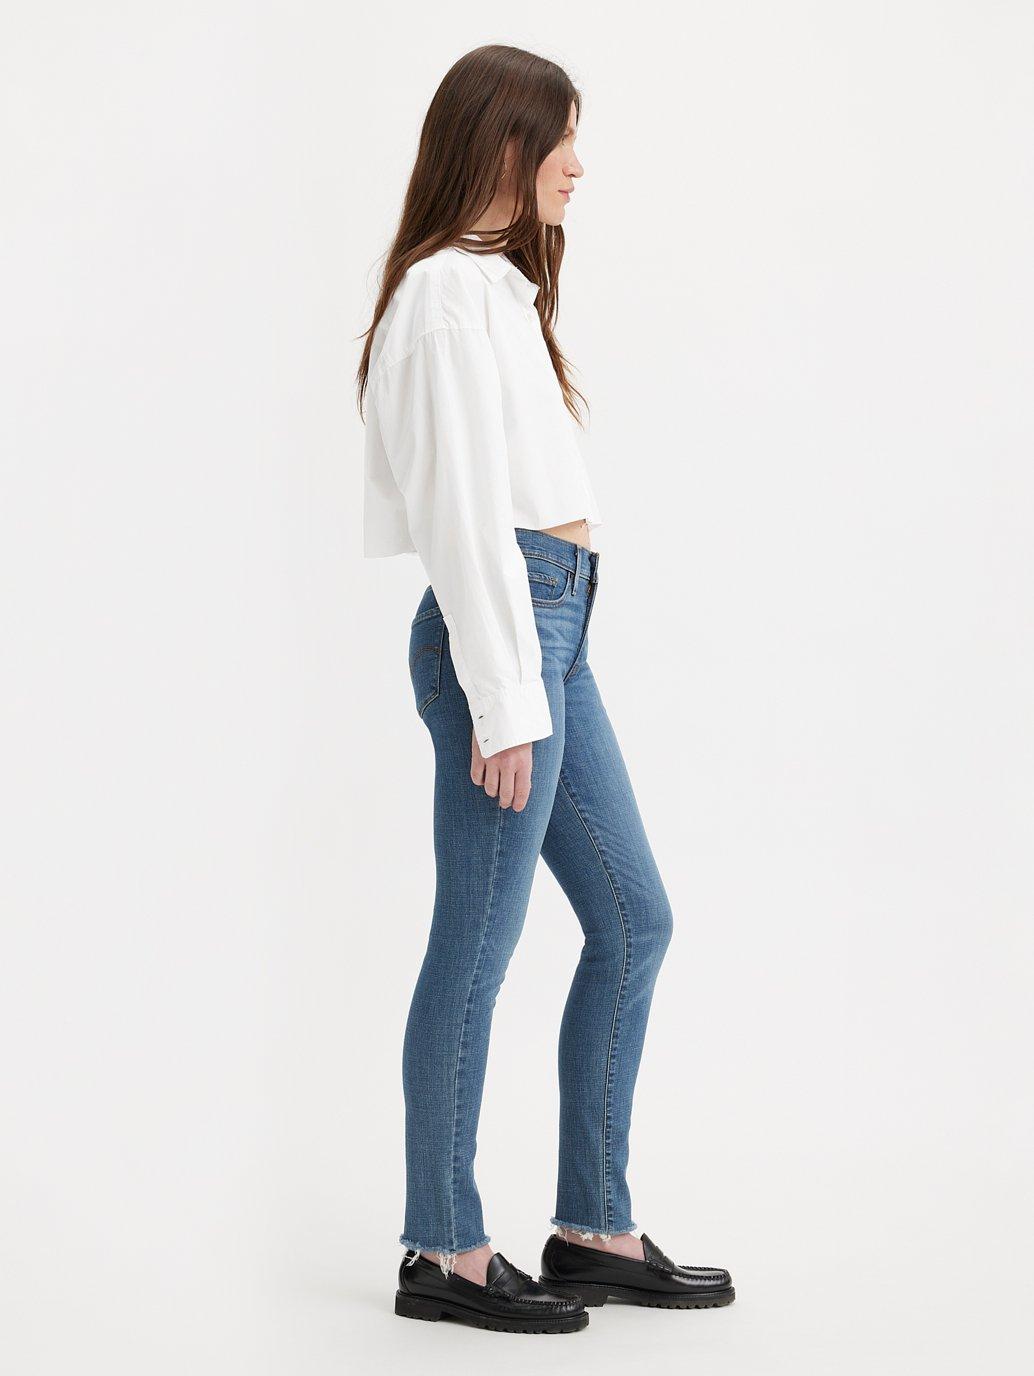 Buy Levi’s® Women's 311 Shaping Skinny Jeans | Levi’s® Official Online ...